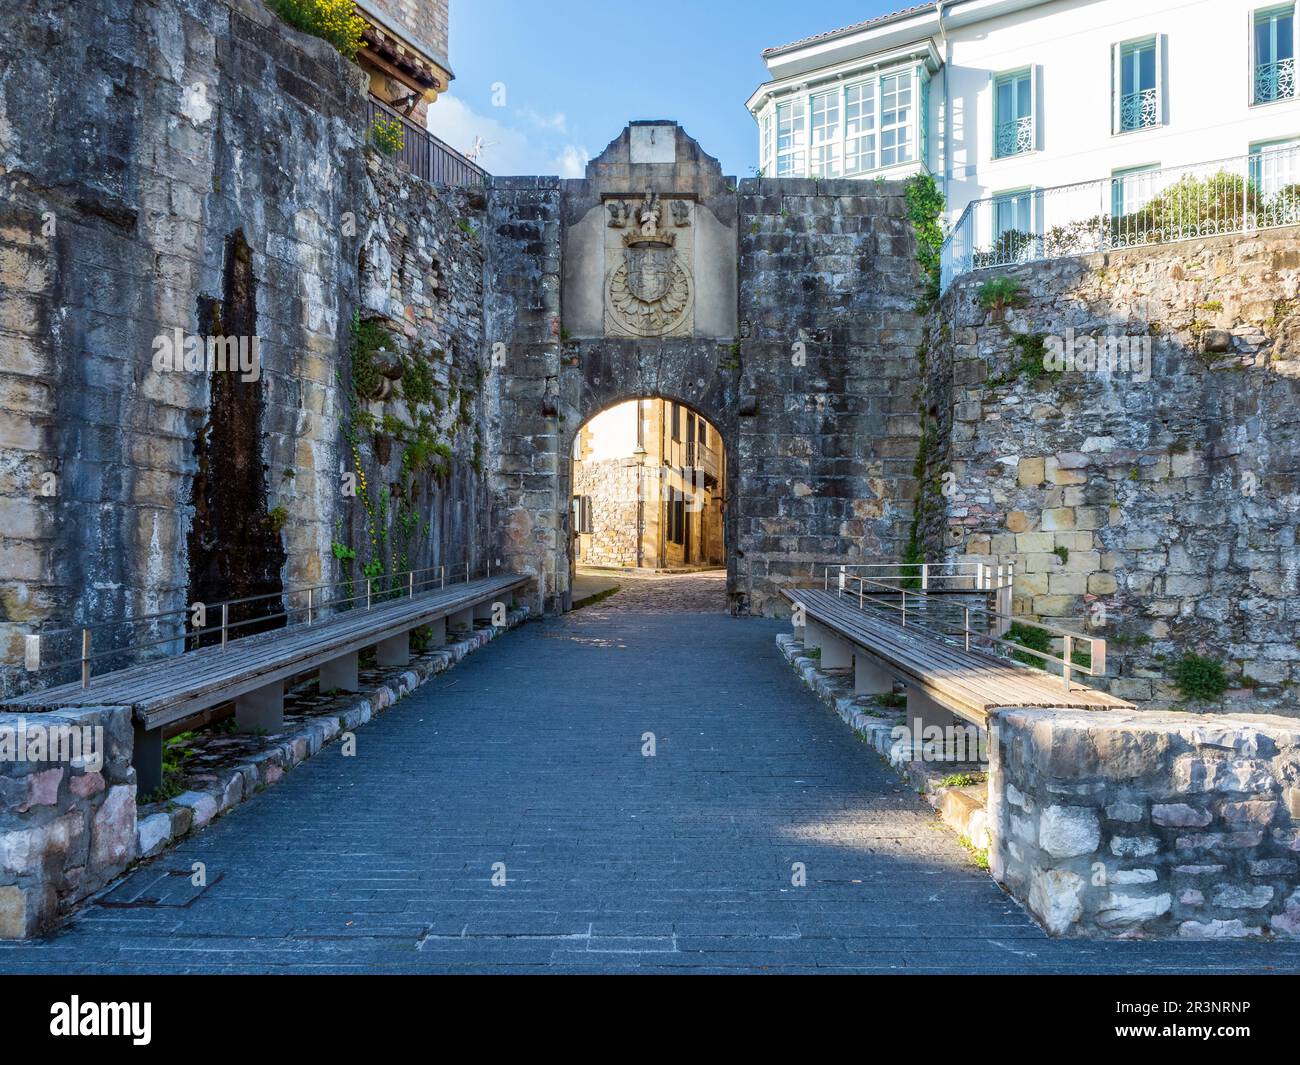 Typical stone streets of Hondarribia Stock Photo